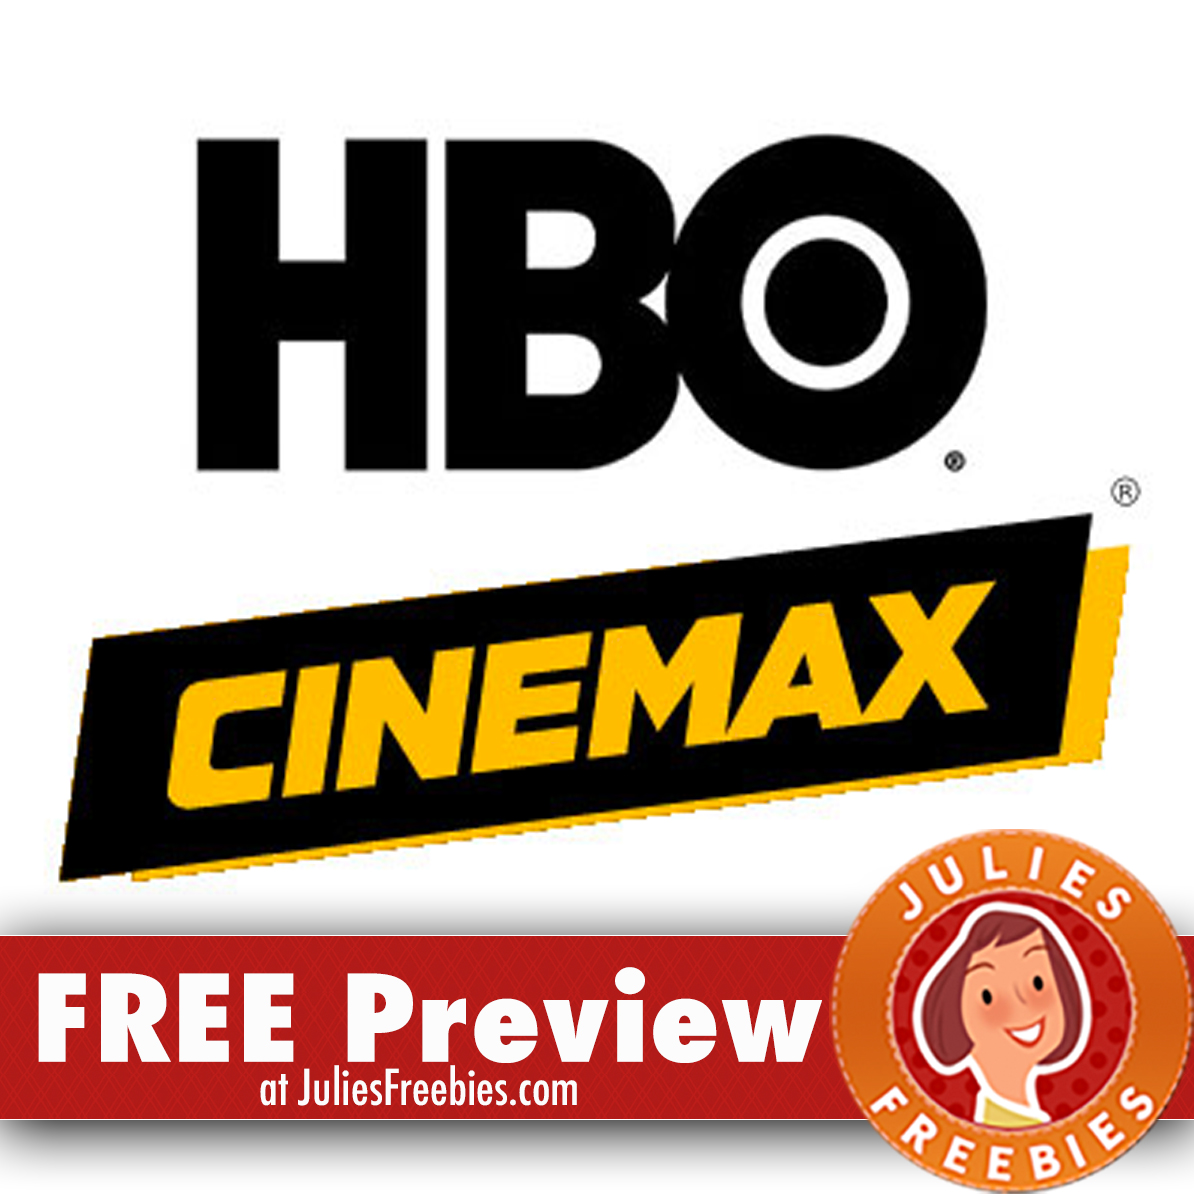 Free HBO & Cinemax Preview Coming Up Julie's Freebies